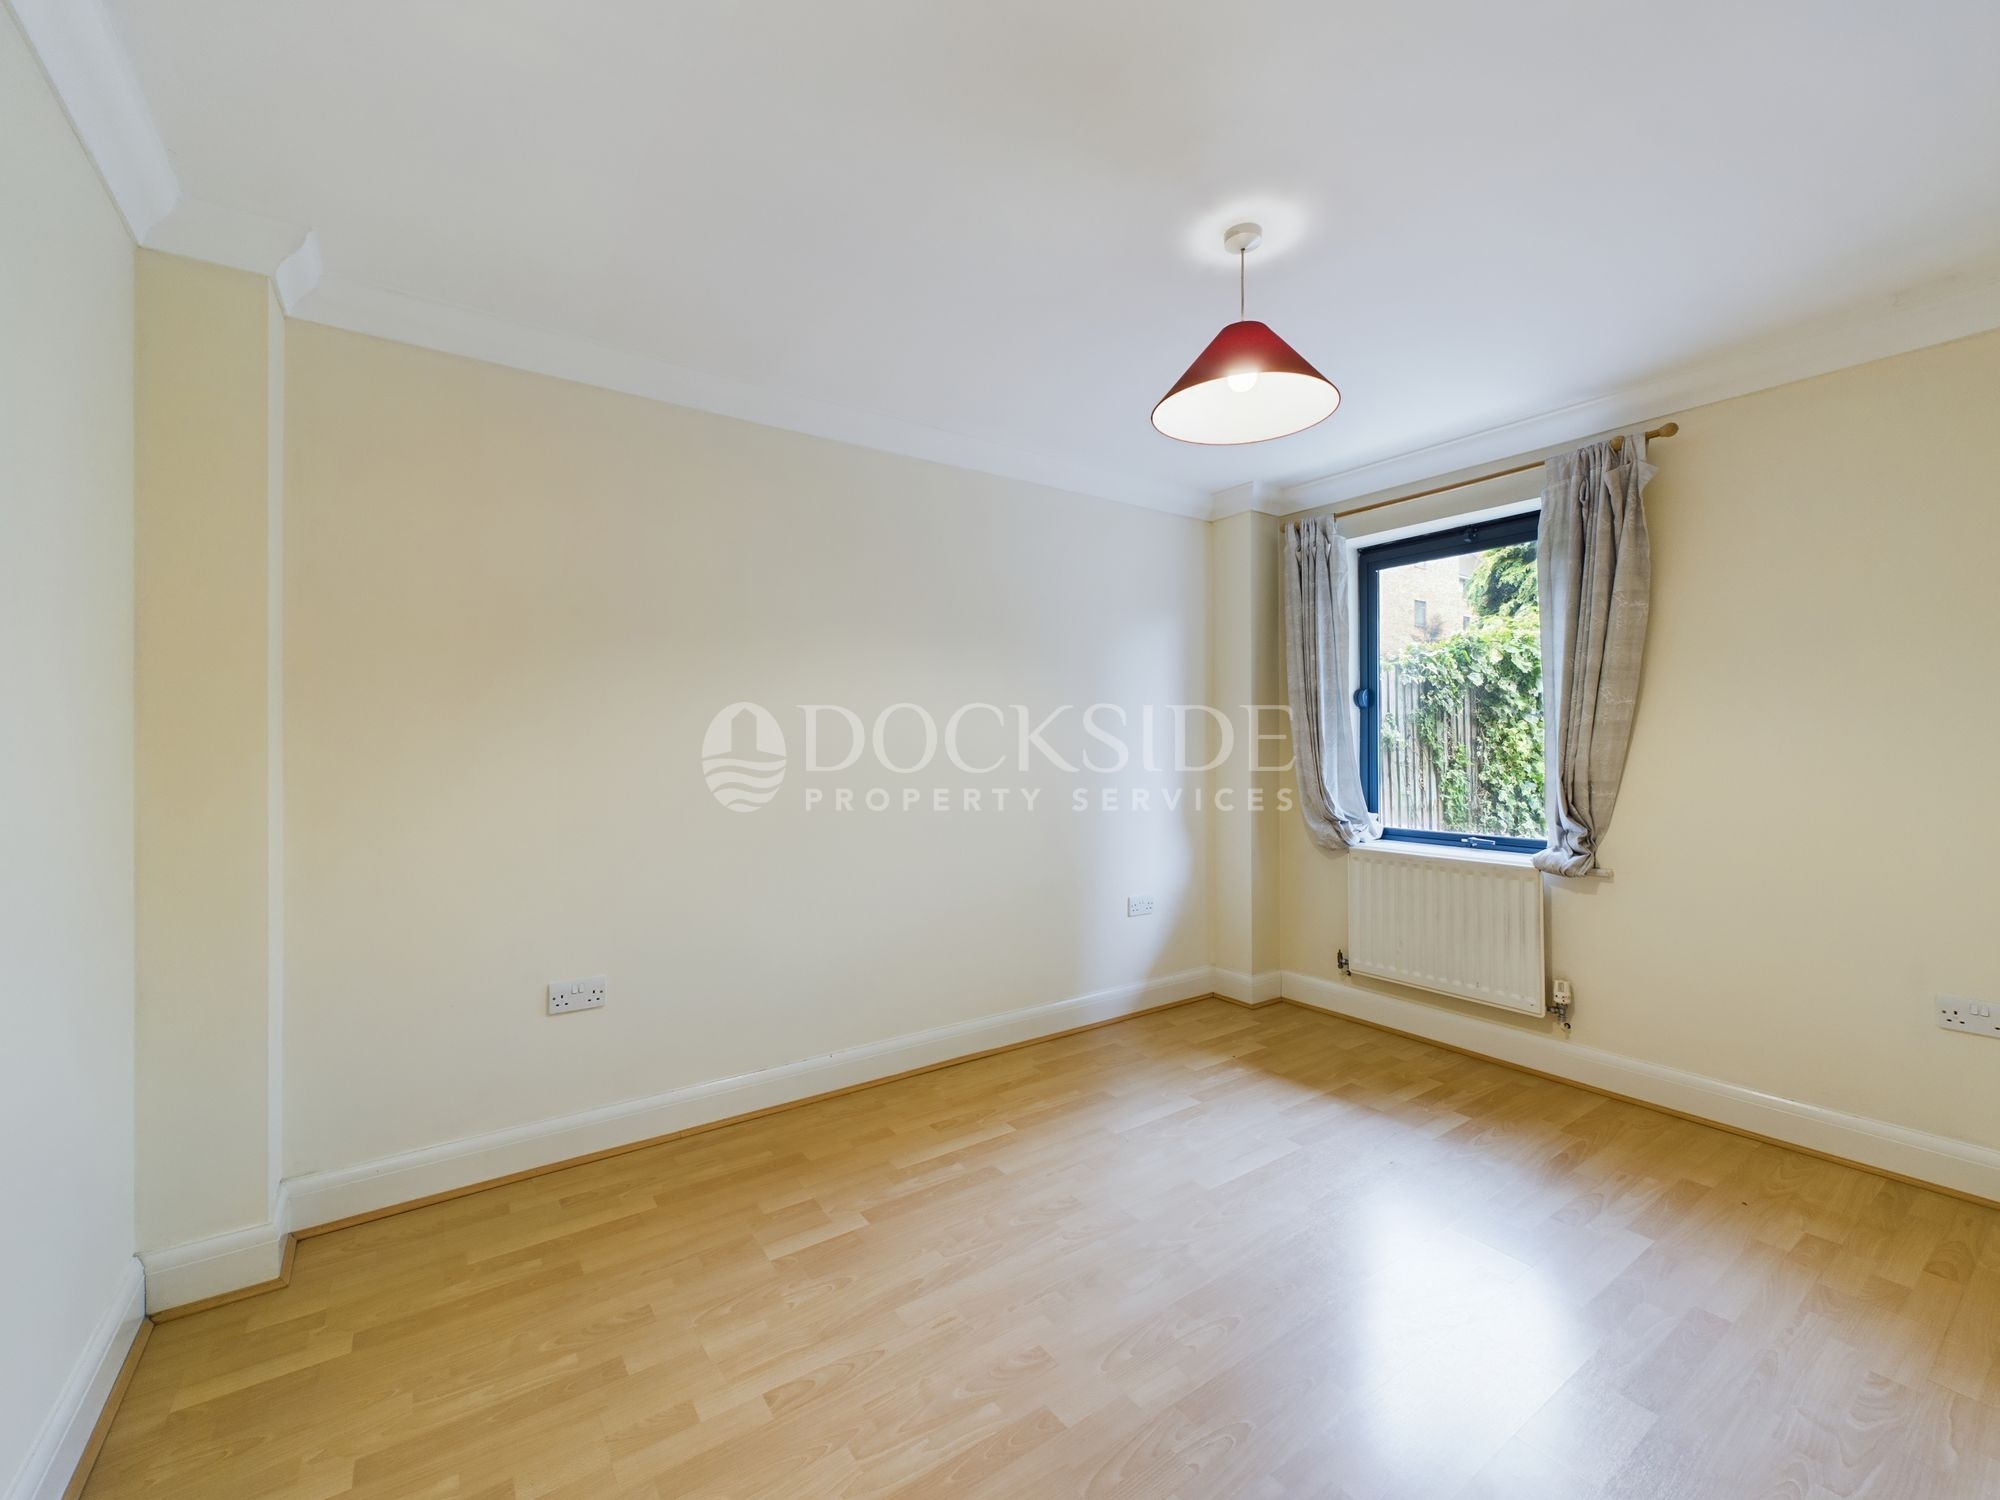 4 bed house to rent in Marc Brunel Way, Chatham 4